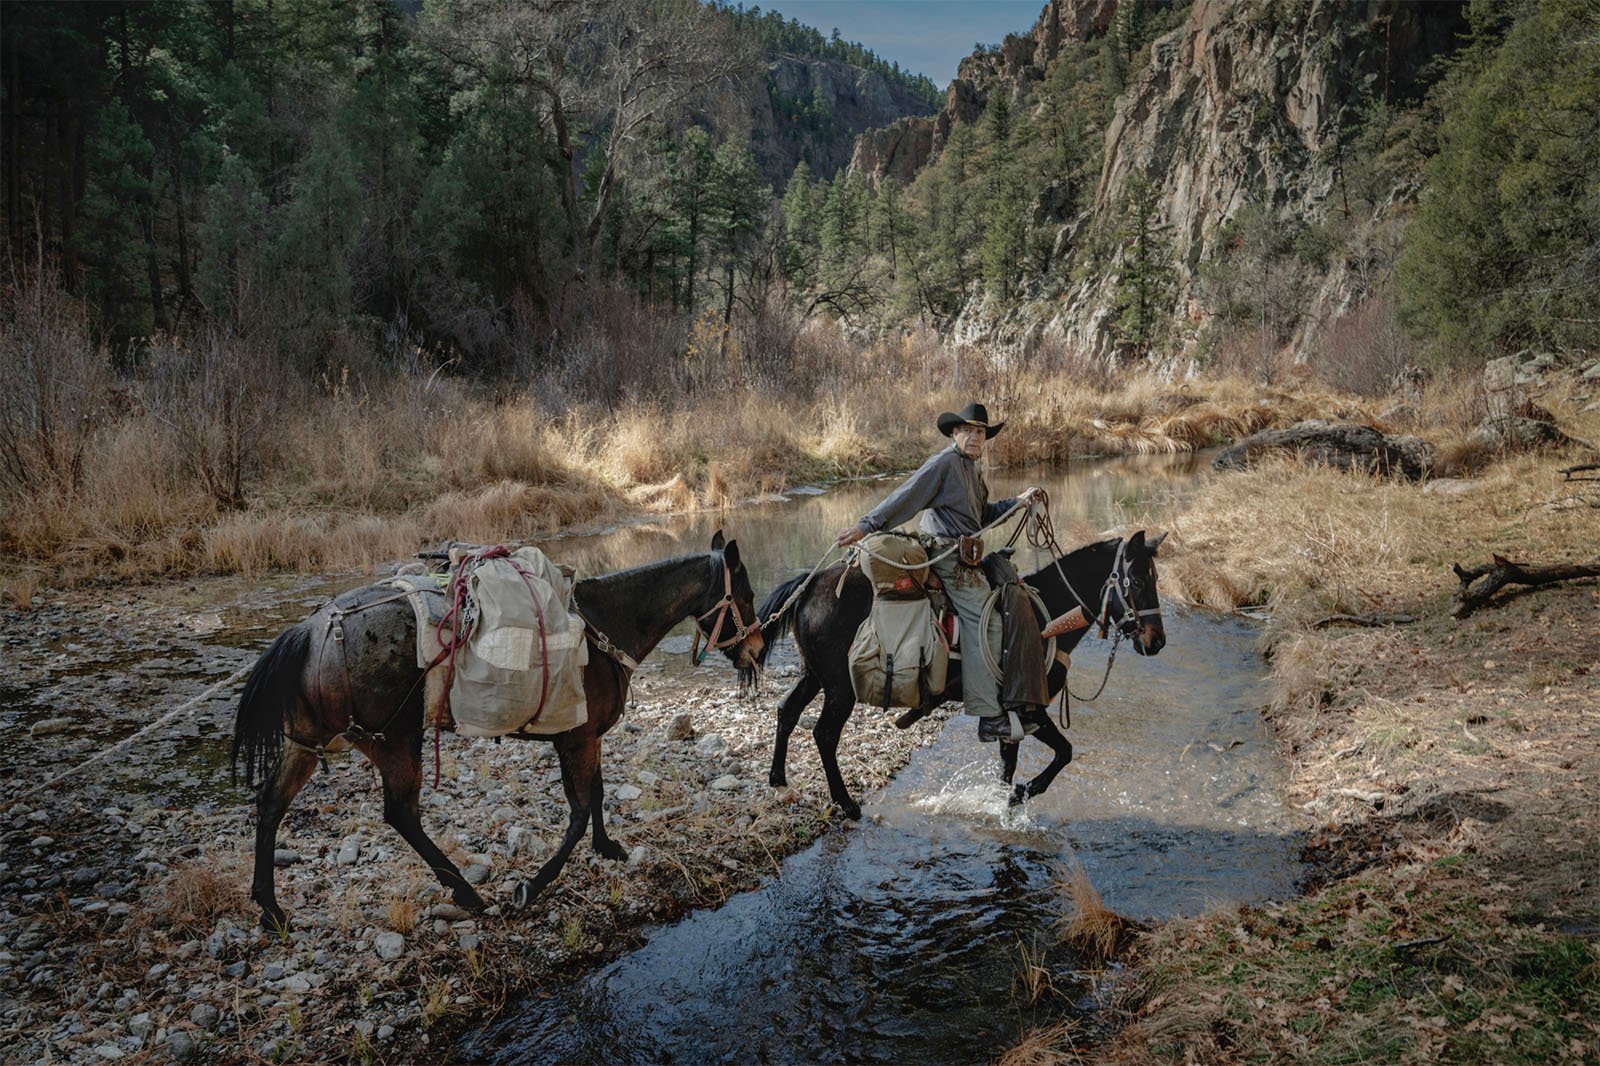 A cowboy on horseback leading another horse across a shallow river in a rugged canyon landscape with wooded slopes and rocky terrain.